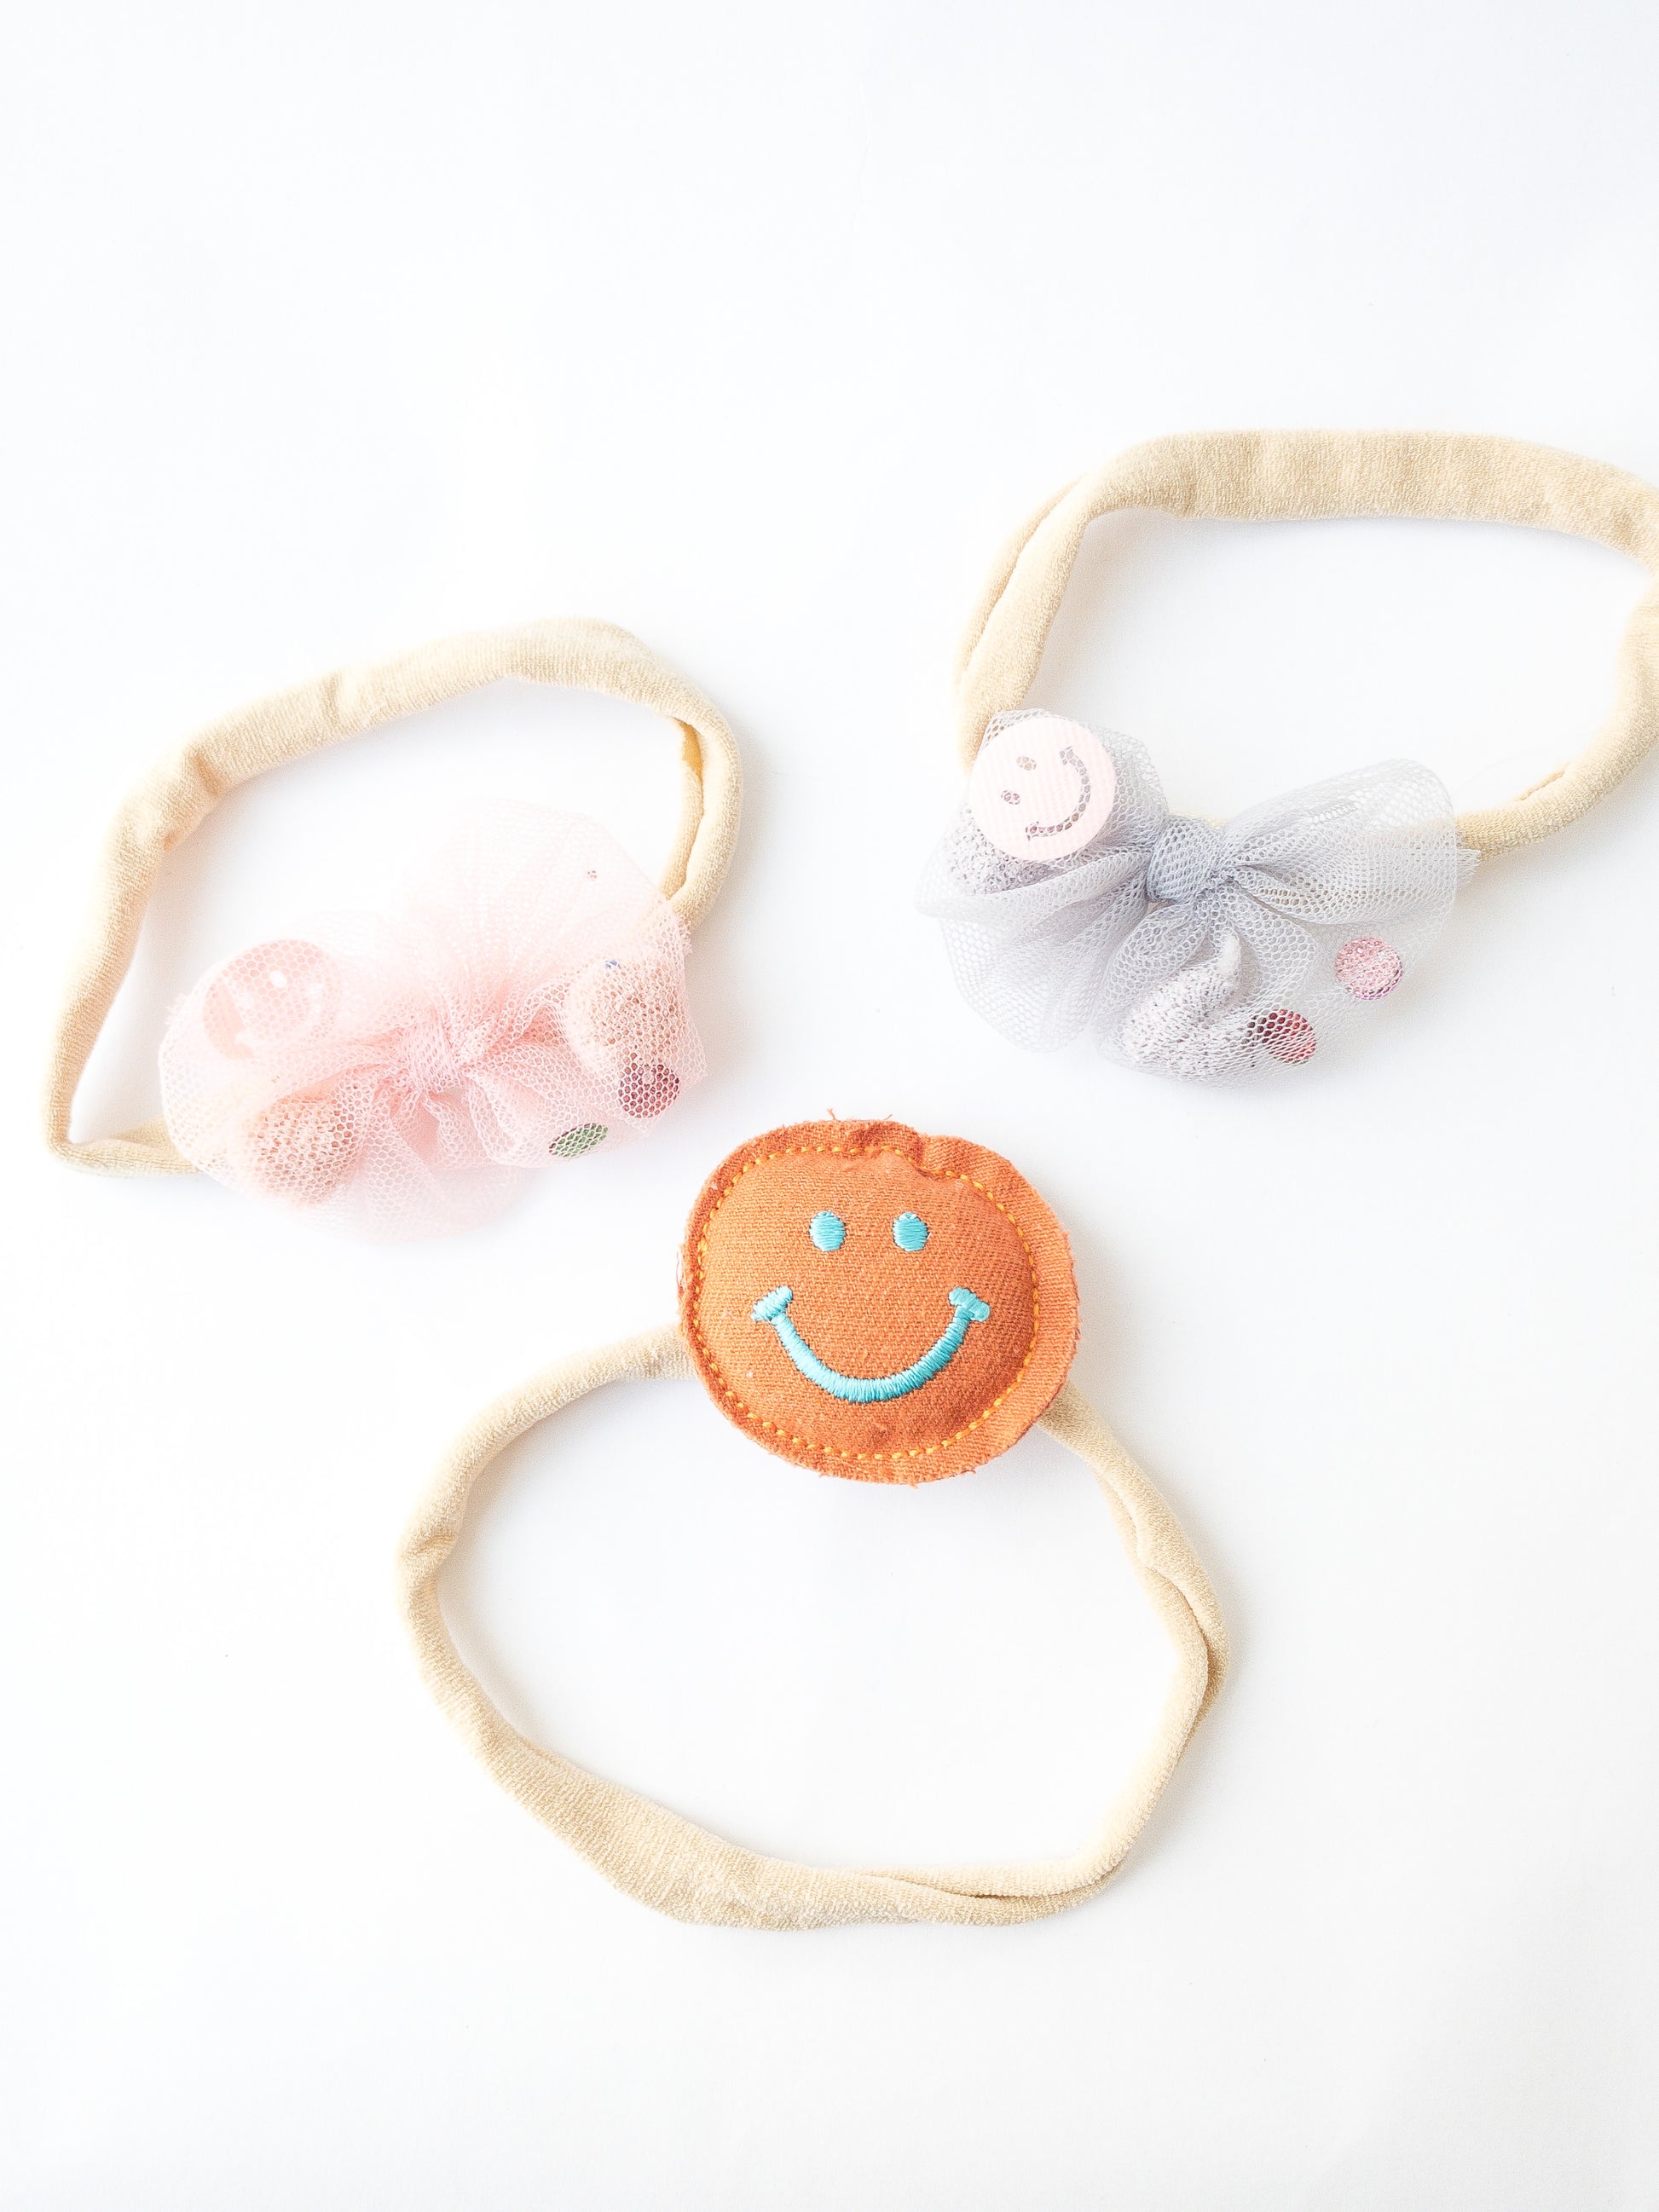 A 3-piece set. This set comes with a friendly plush smiley face headband, a pink mesh bow headband and a grey mesh bow headband with pom poms, sequins and smiley faces inside. Great for kids with little to no hair. The nylon elastic is super stretchy and super soft.